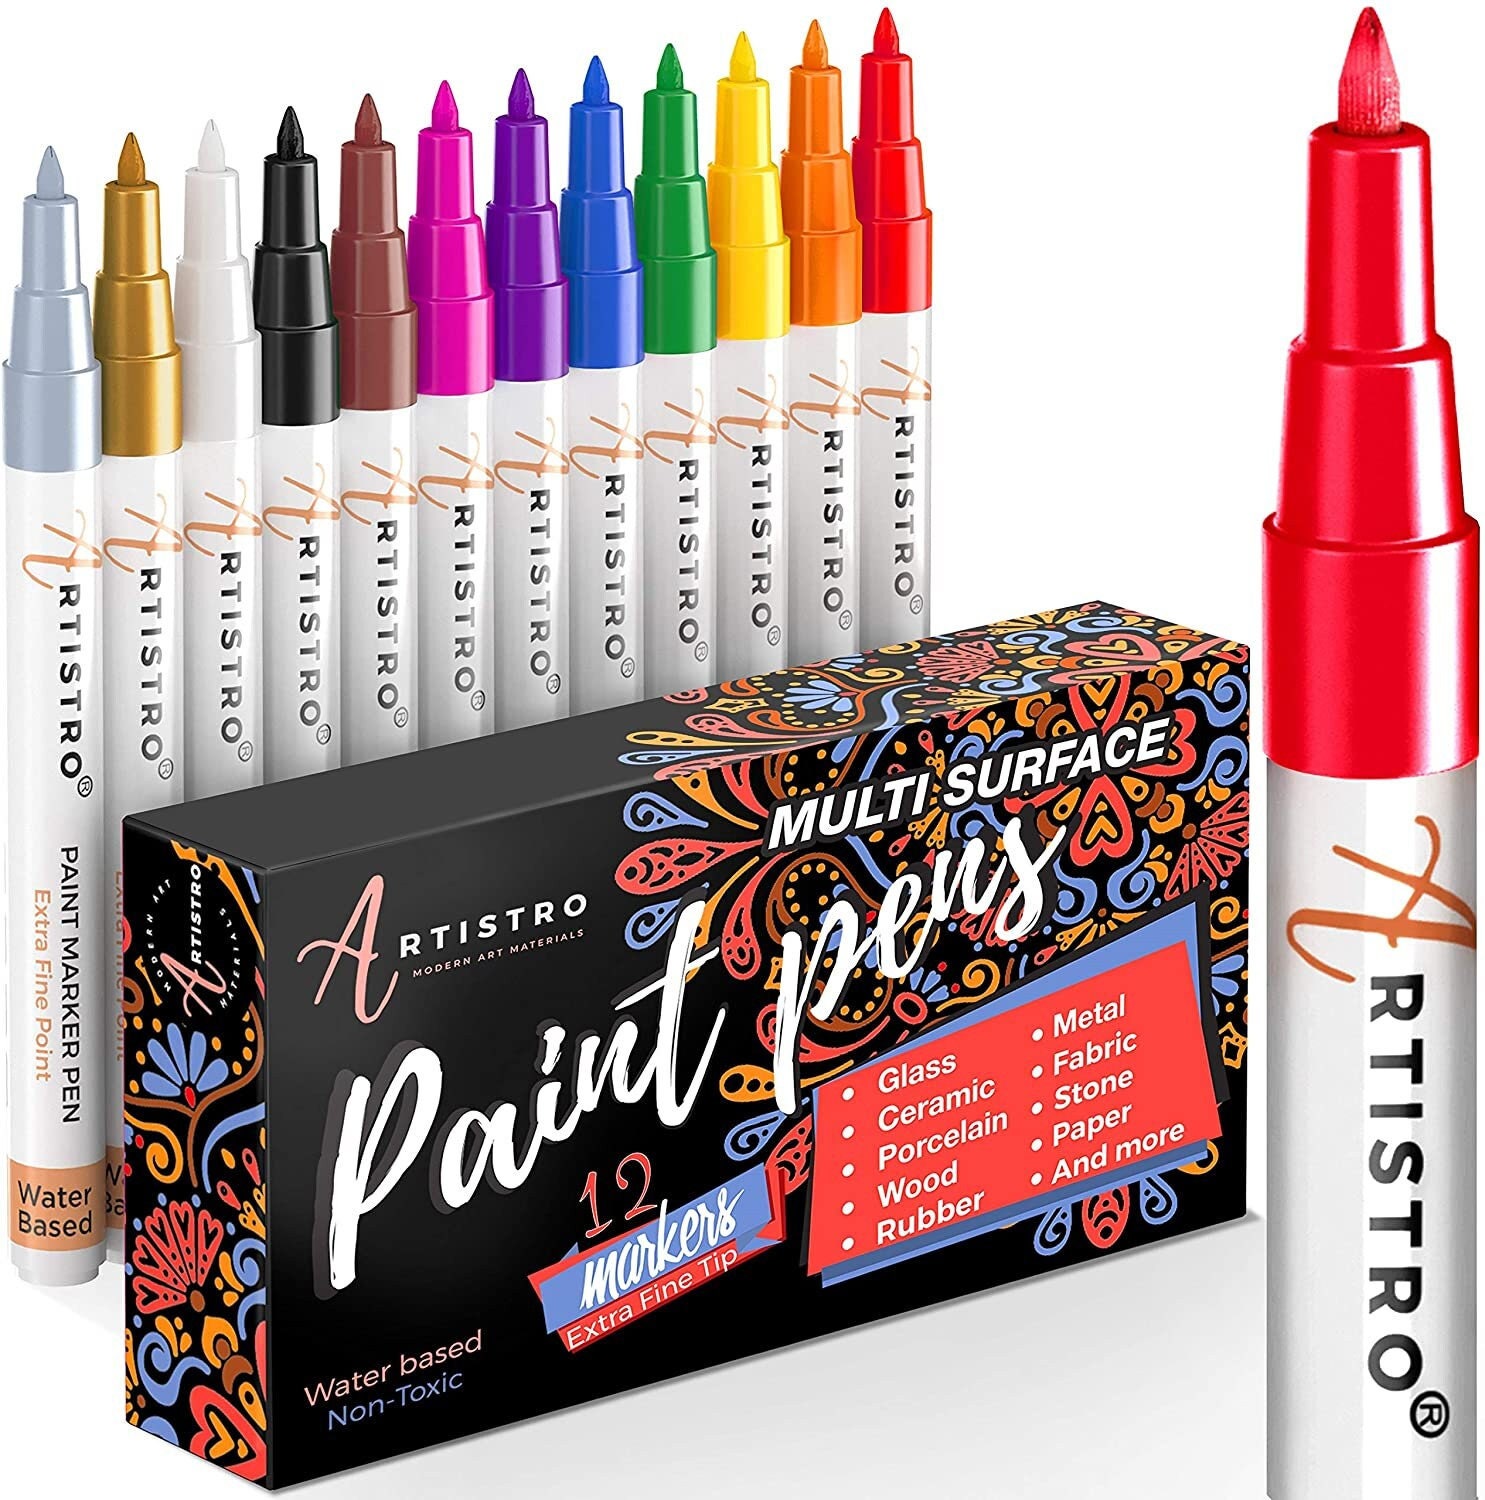 Sharpie 1783278 Water-Based Metallic Paint Markers, Extra Fine, Assorted,  3/Pack - 1783278